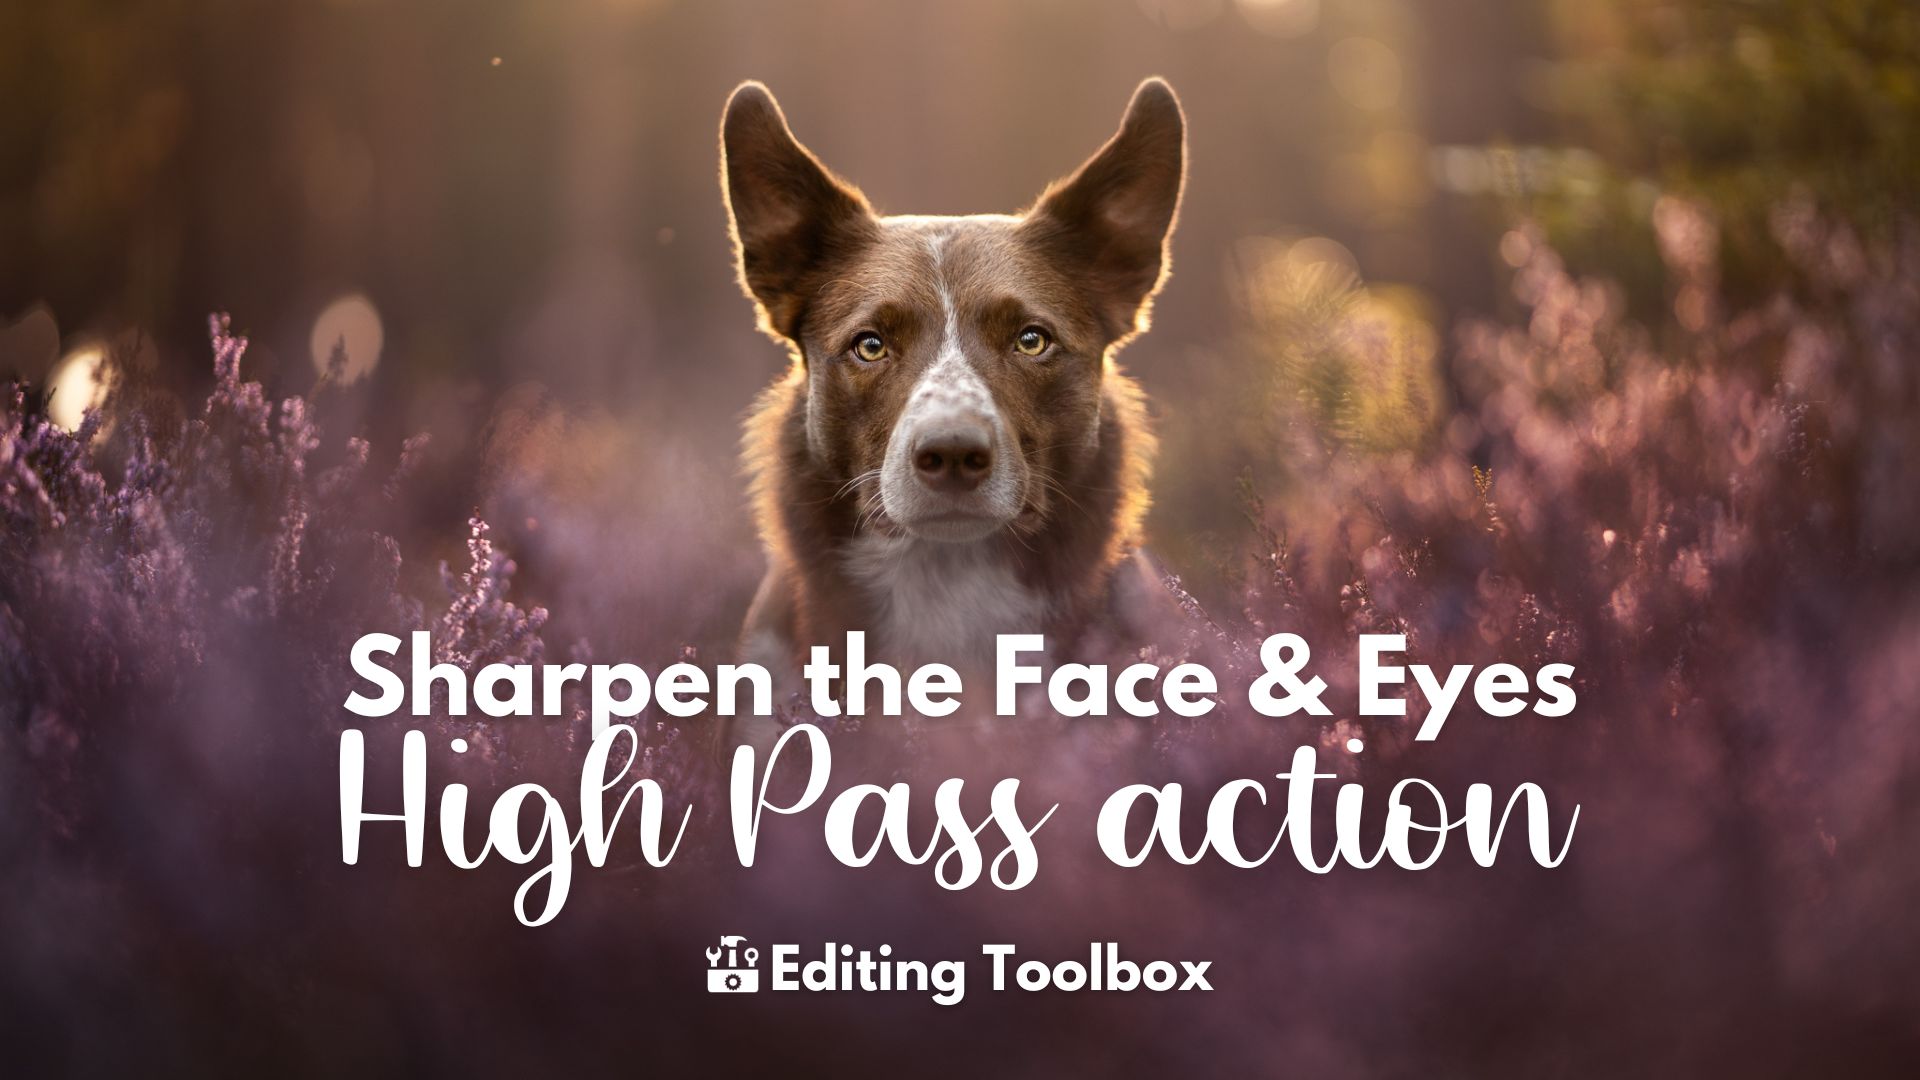 High Pass Action to Sharpen the Face & Eyes